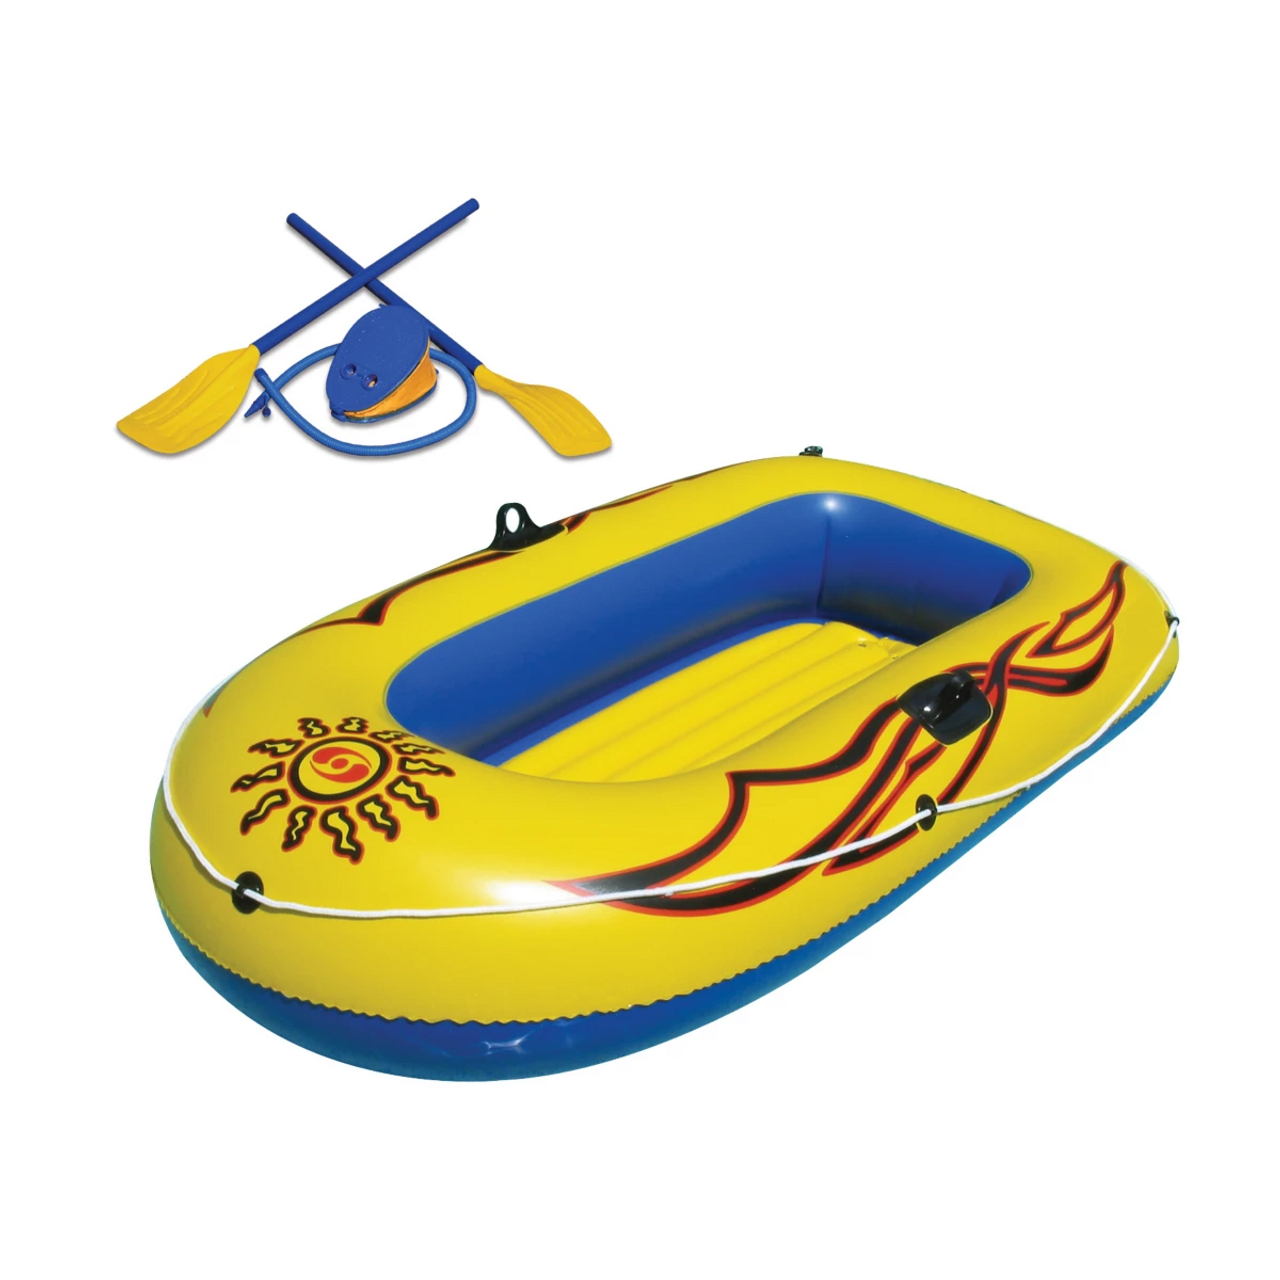 Sunskiff Inflatable Pool & Beach Boat 3 Person Kit - Yellow/Blue